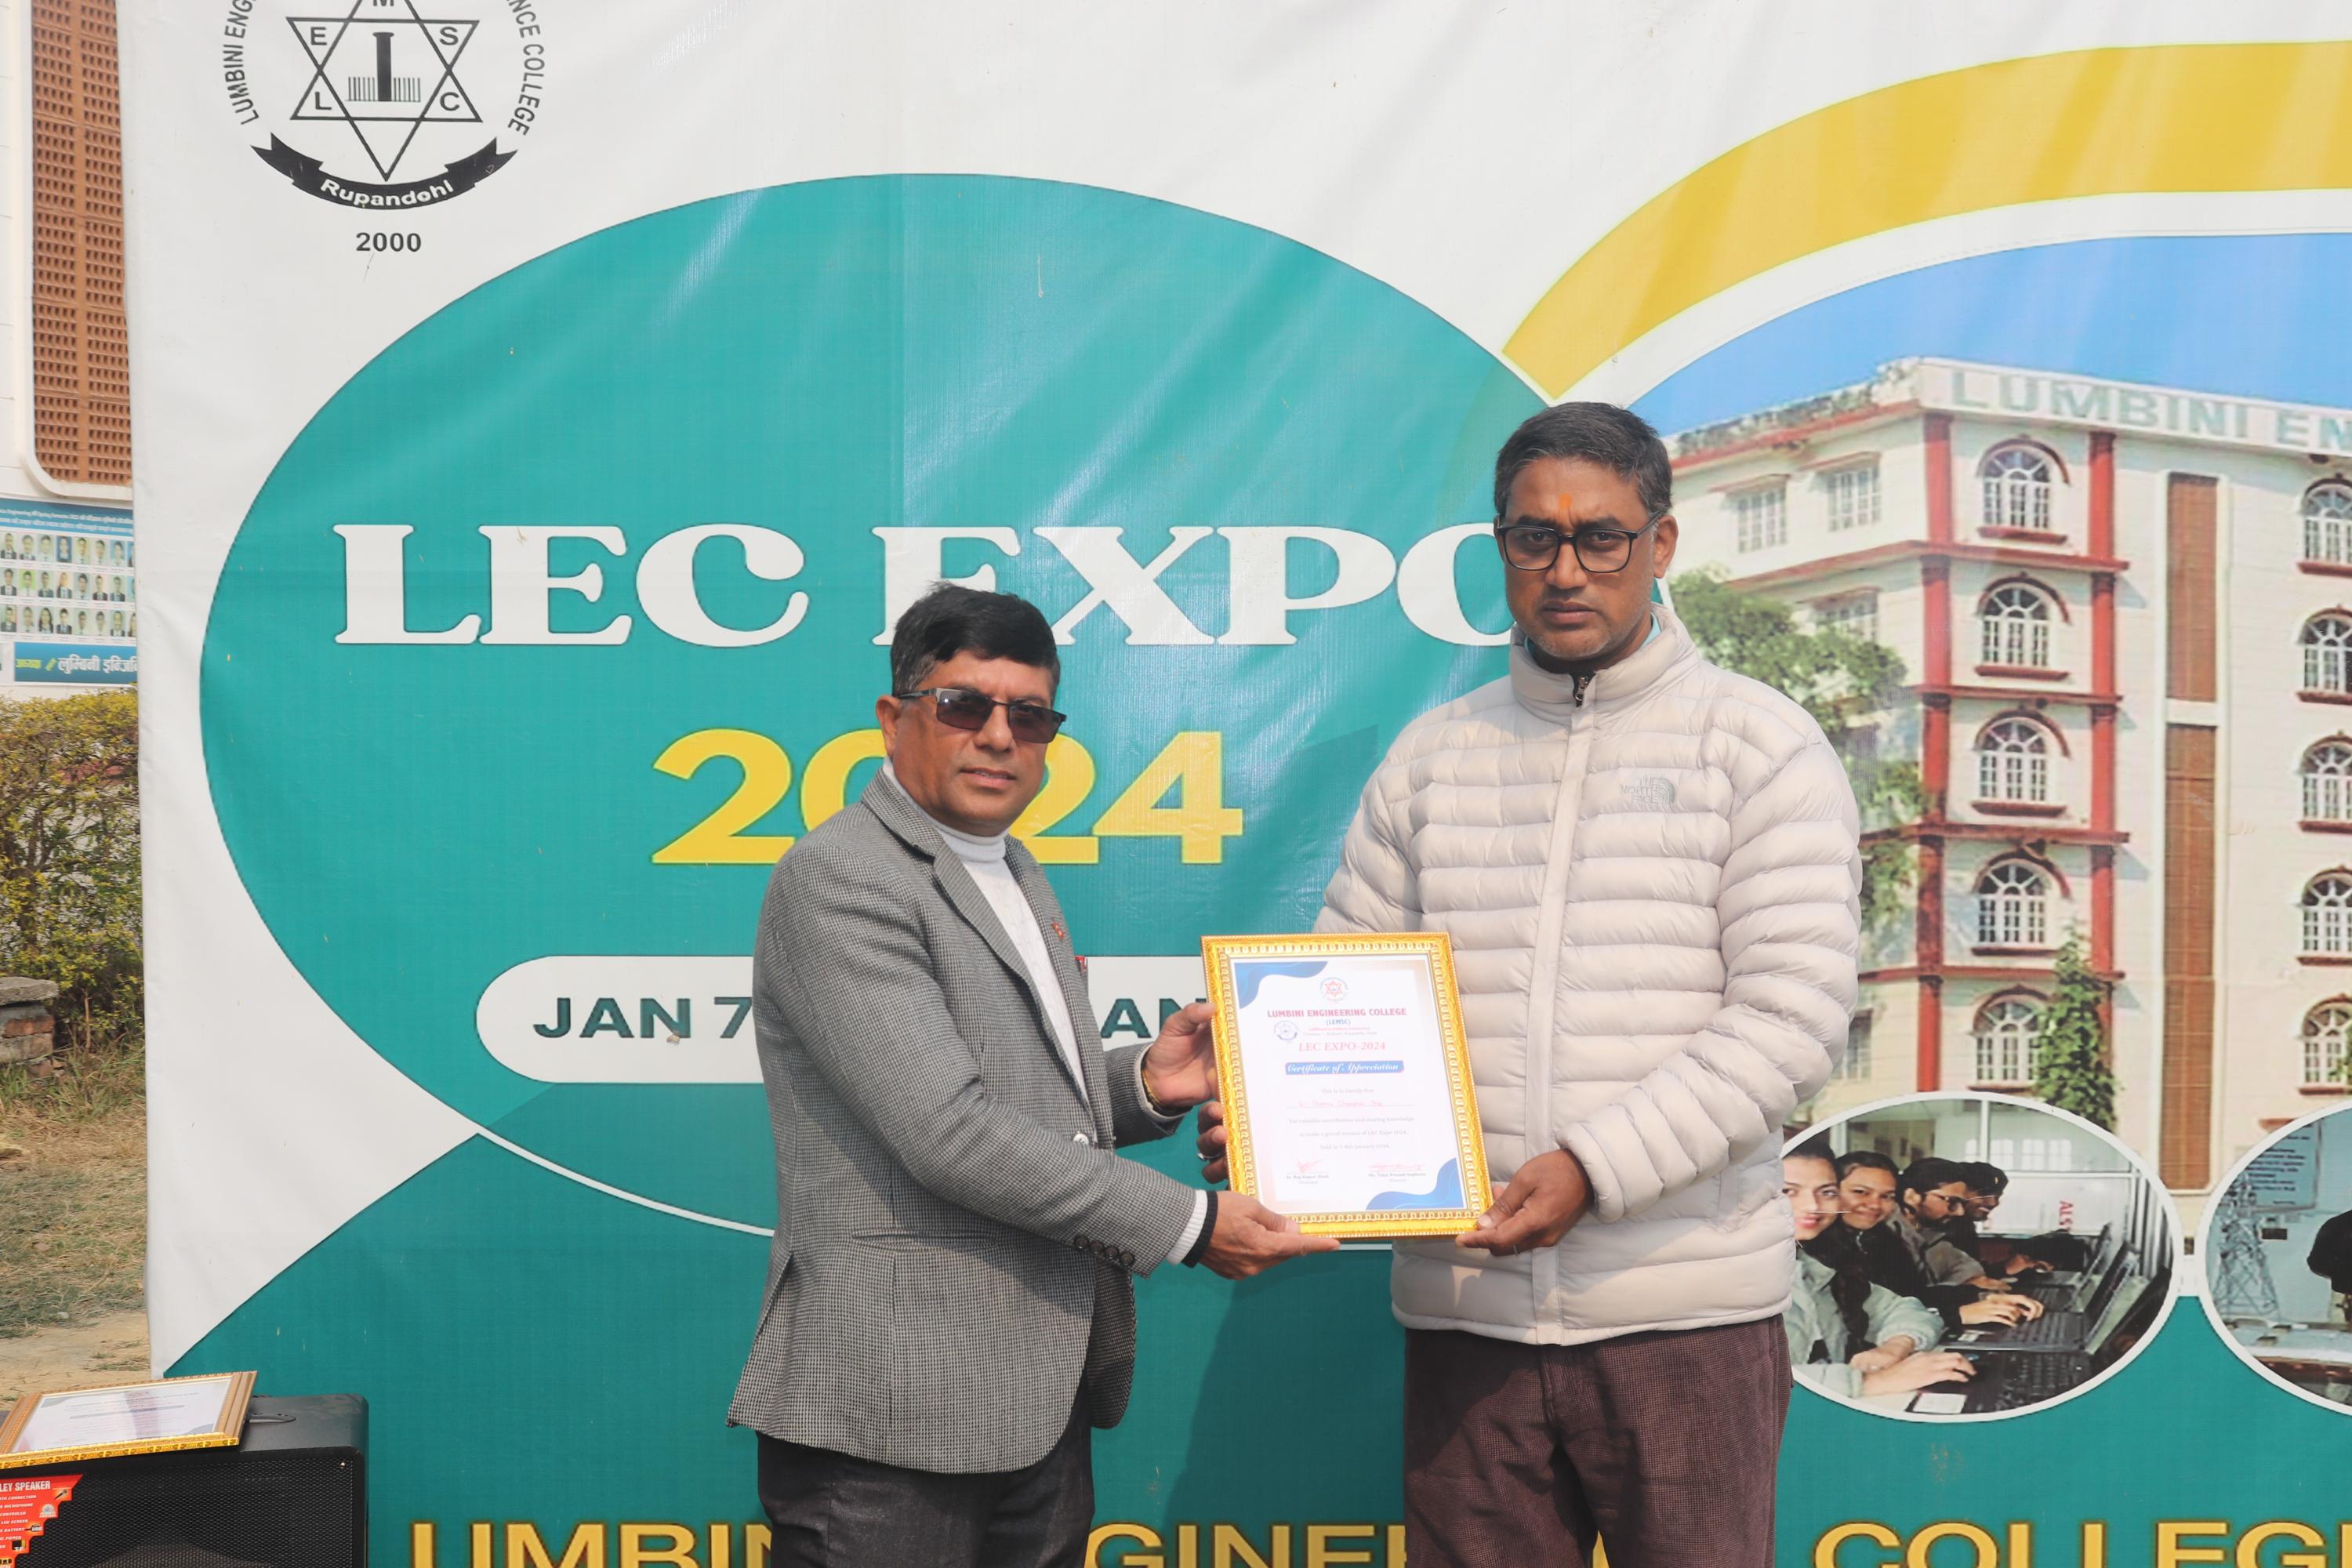 Prize Distribution of LEC Expo 2080